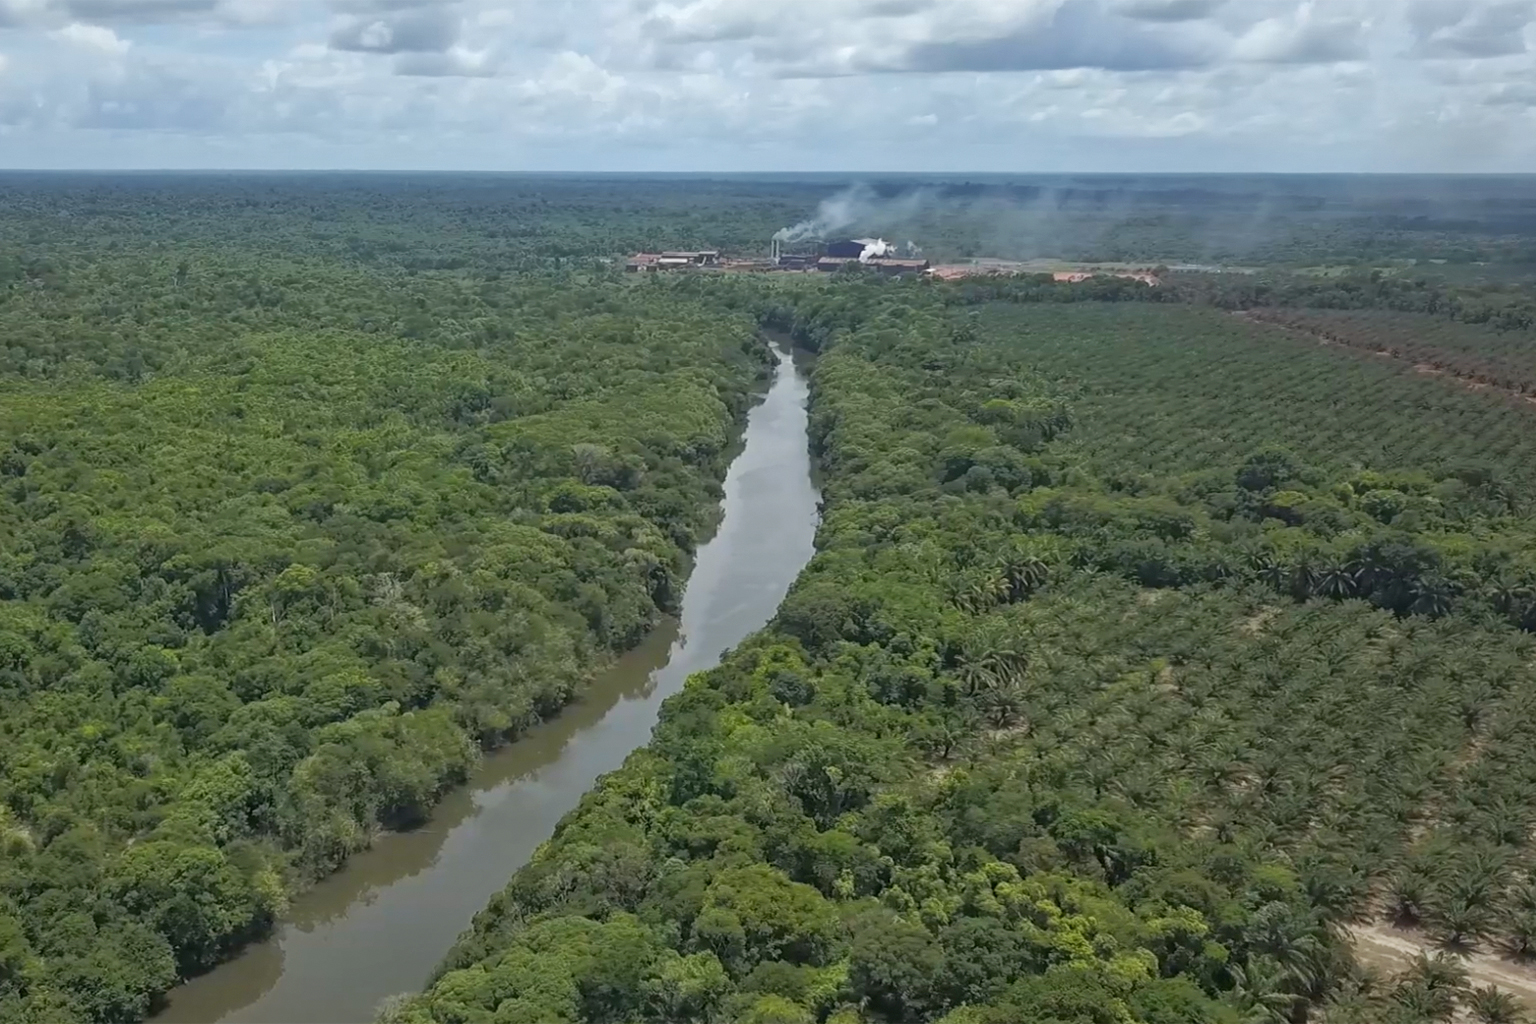 Aerial view of Agropalma's mill, legal reserve and palm crops along the Acará River.